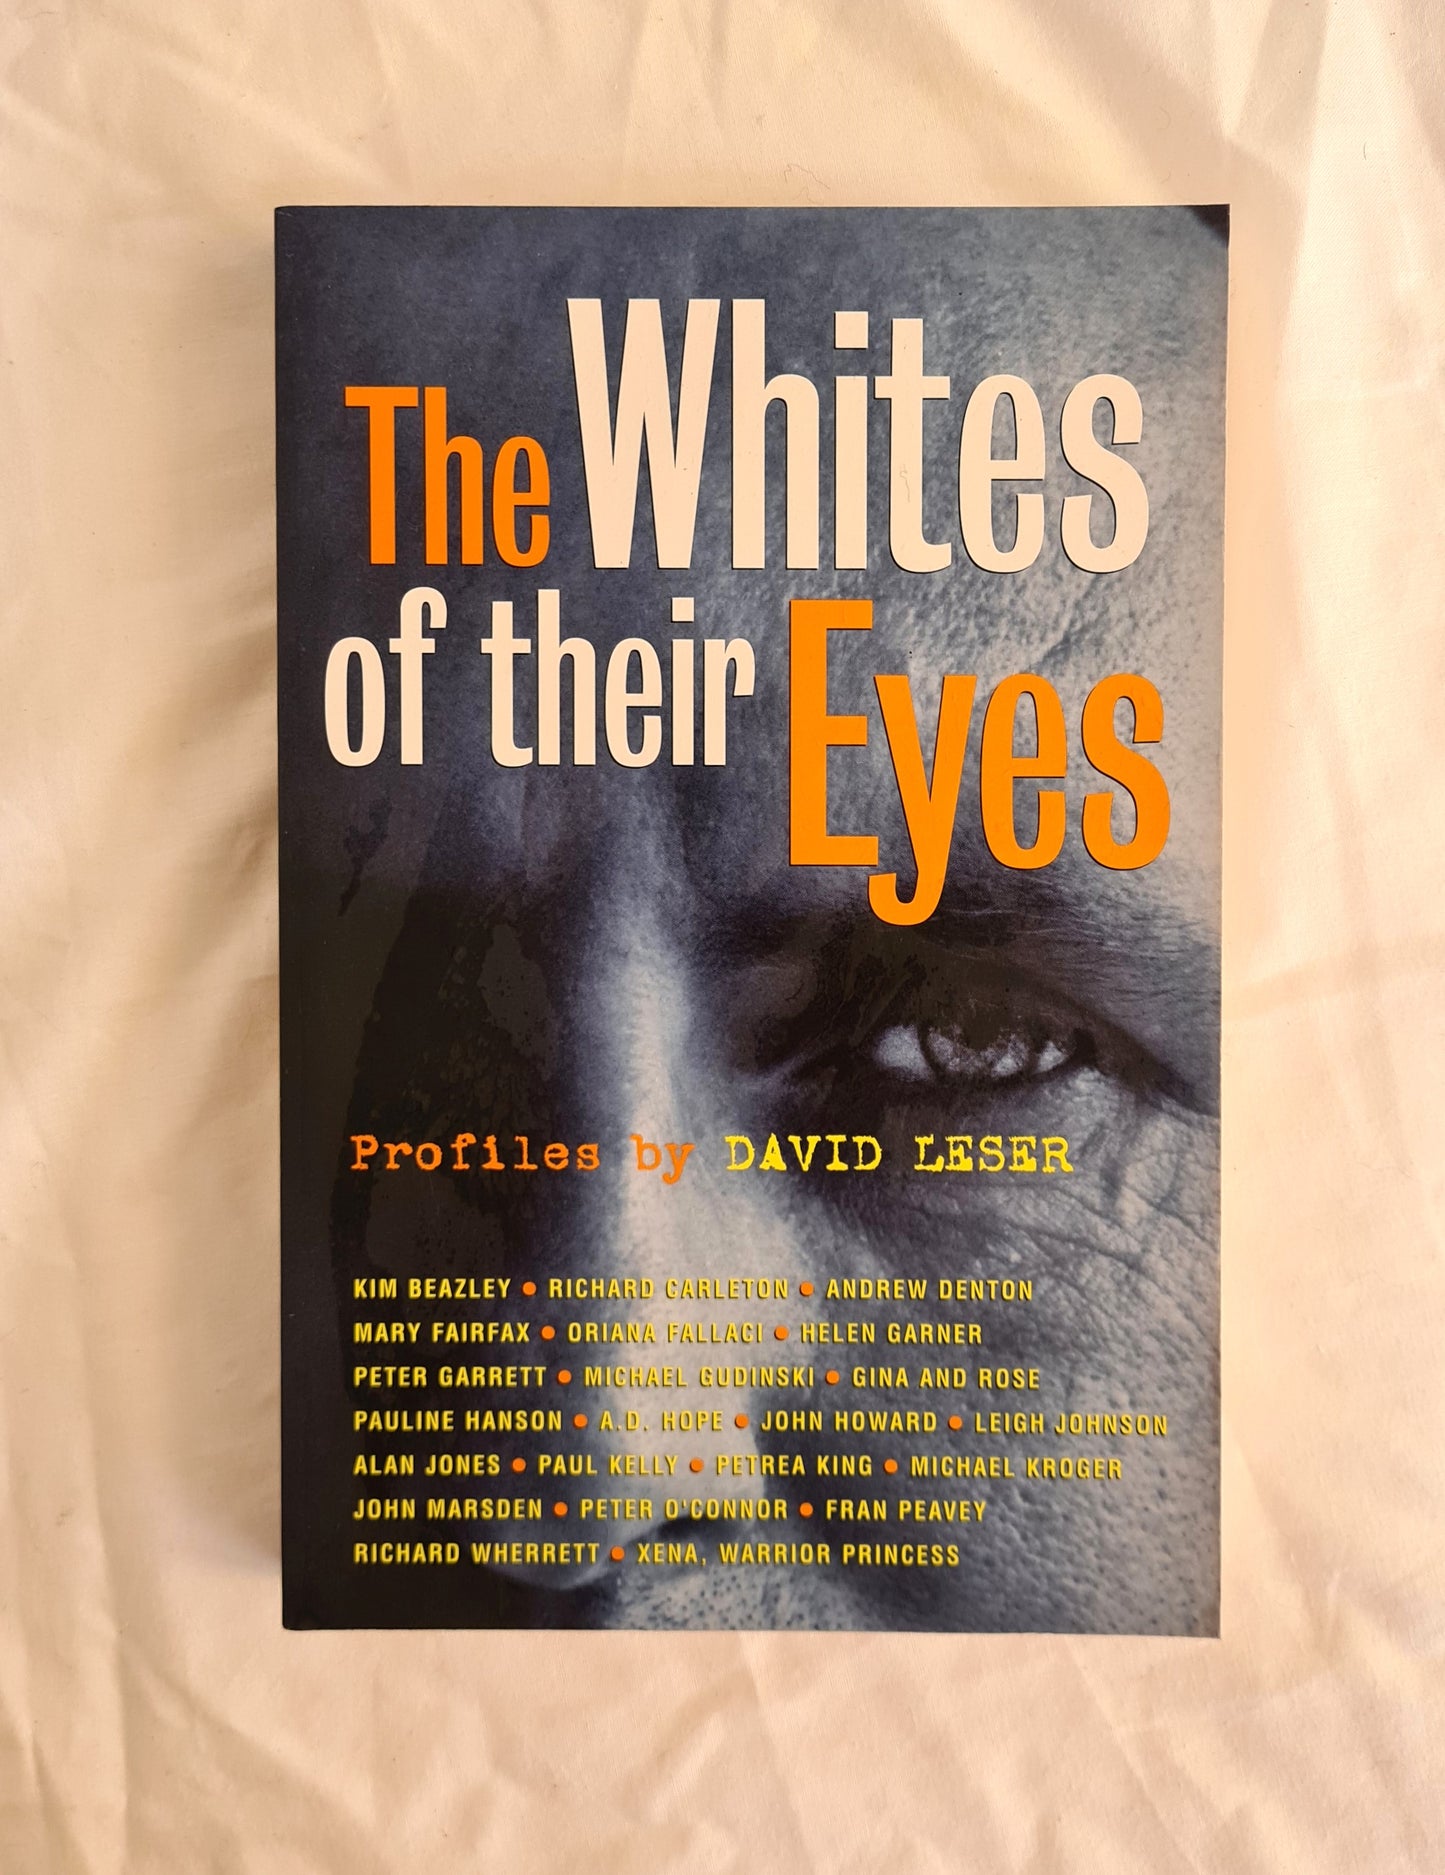 The Whites of Their Eyes by David Leser